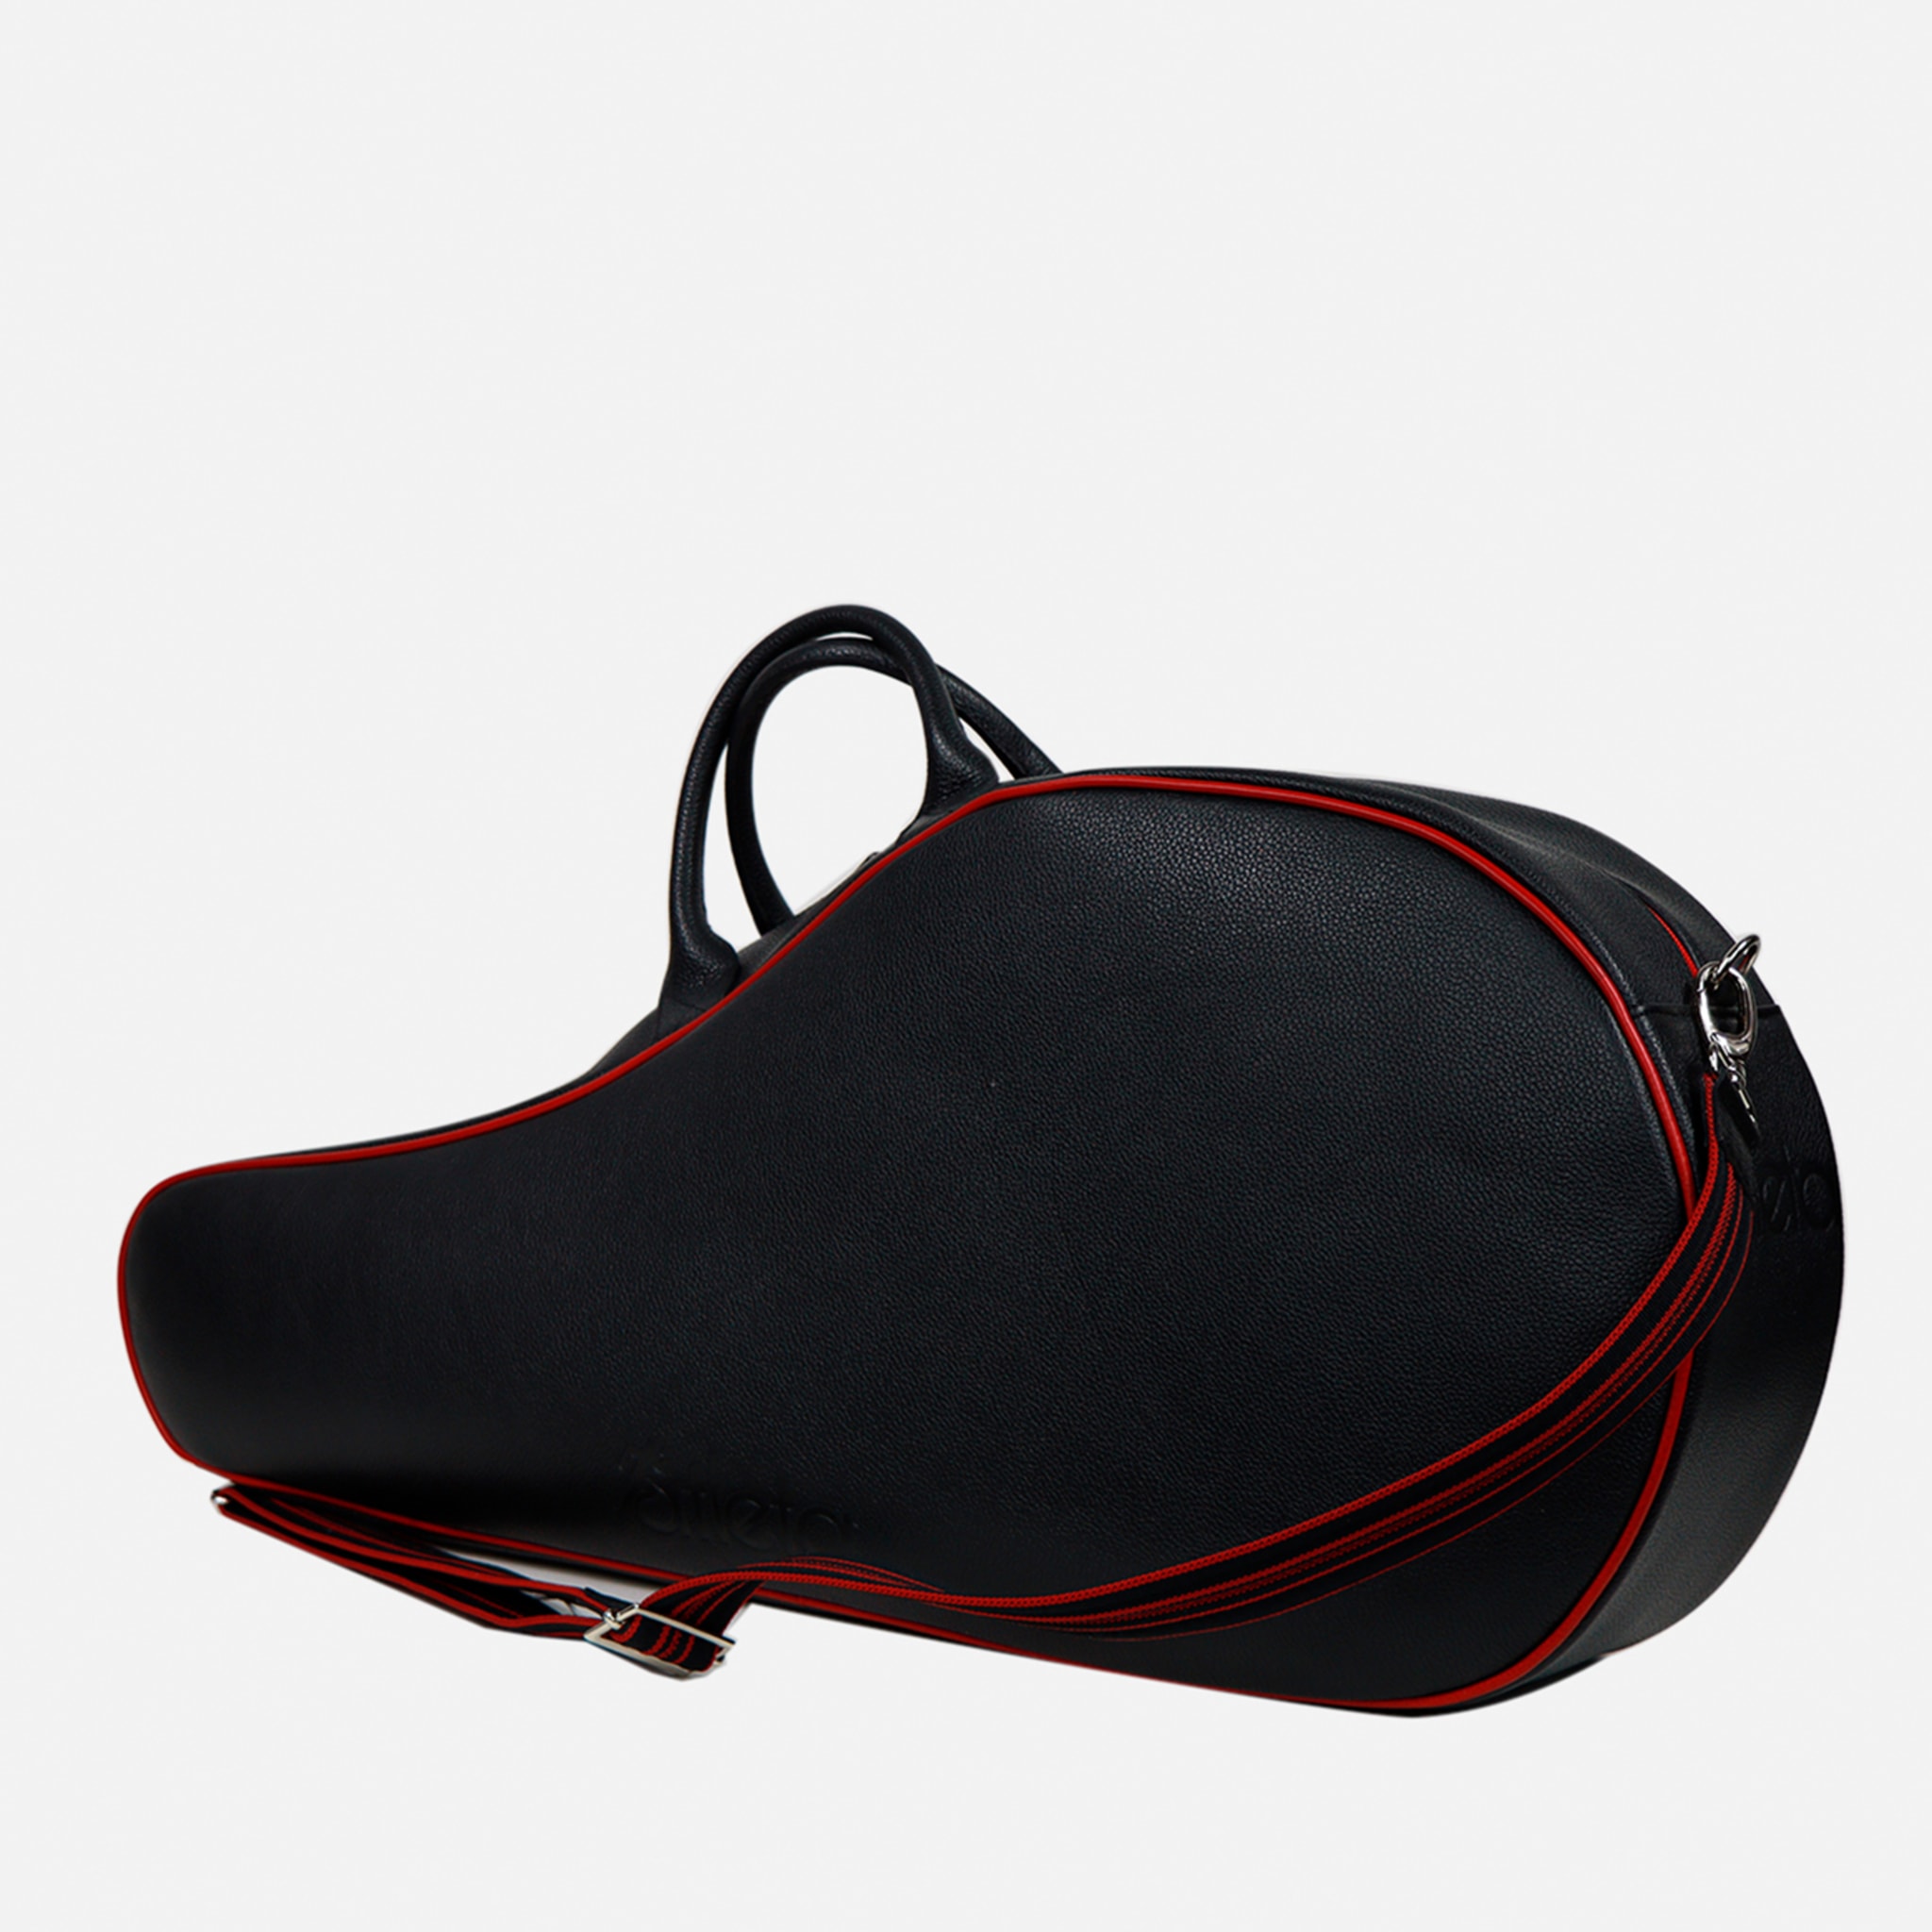 Red and Black Tennis Bag - Alternative view 1